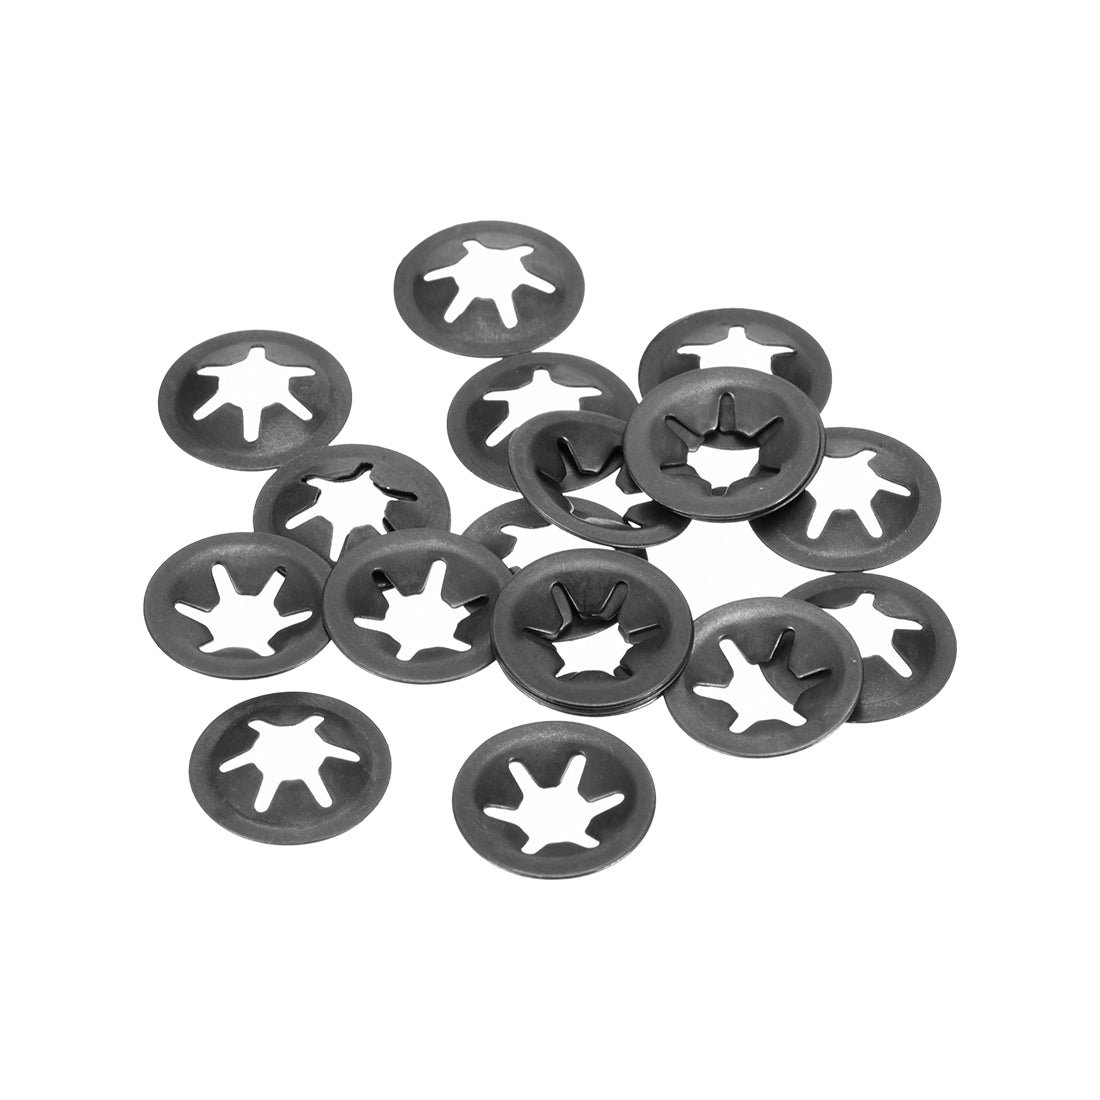 Uxcell Uxcell M10 Internal Tooth Star Locking Washer 9.2mm I.D. 20mm O.D. Lock Washers Push On Locking Speed Clip, 65Mn Black Oxide Finish 20pcs